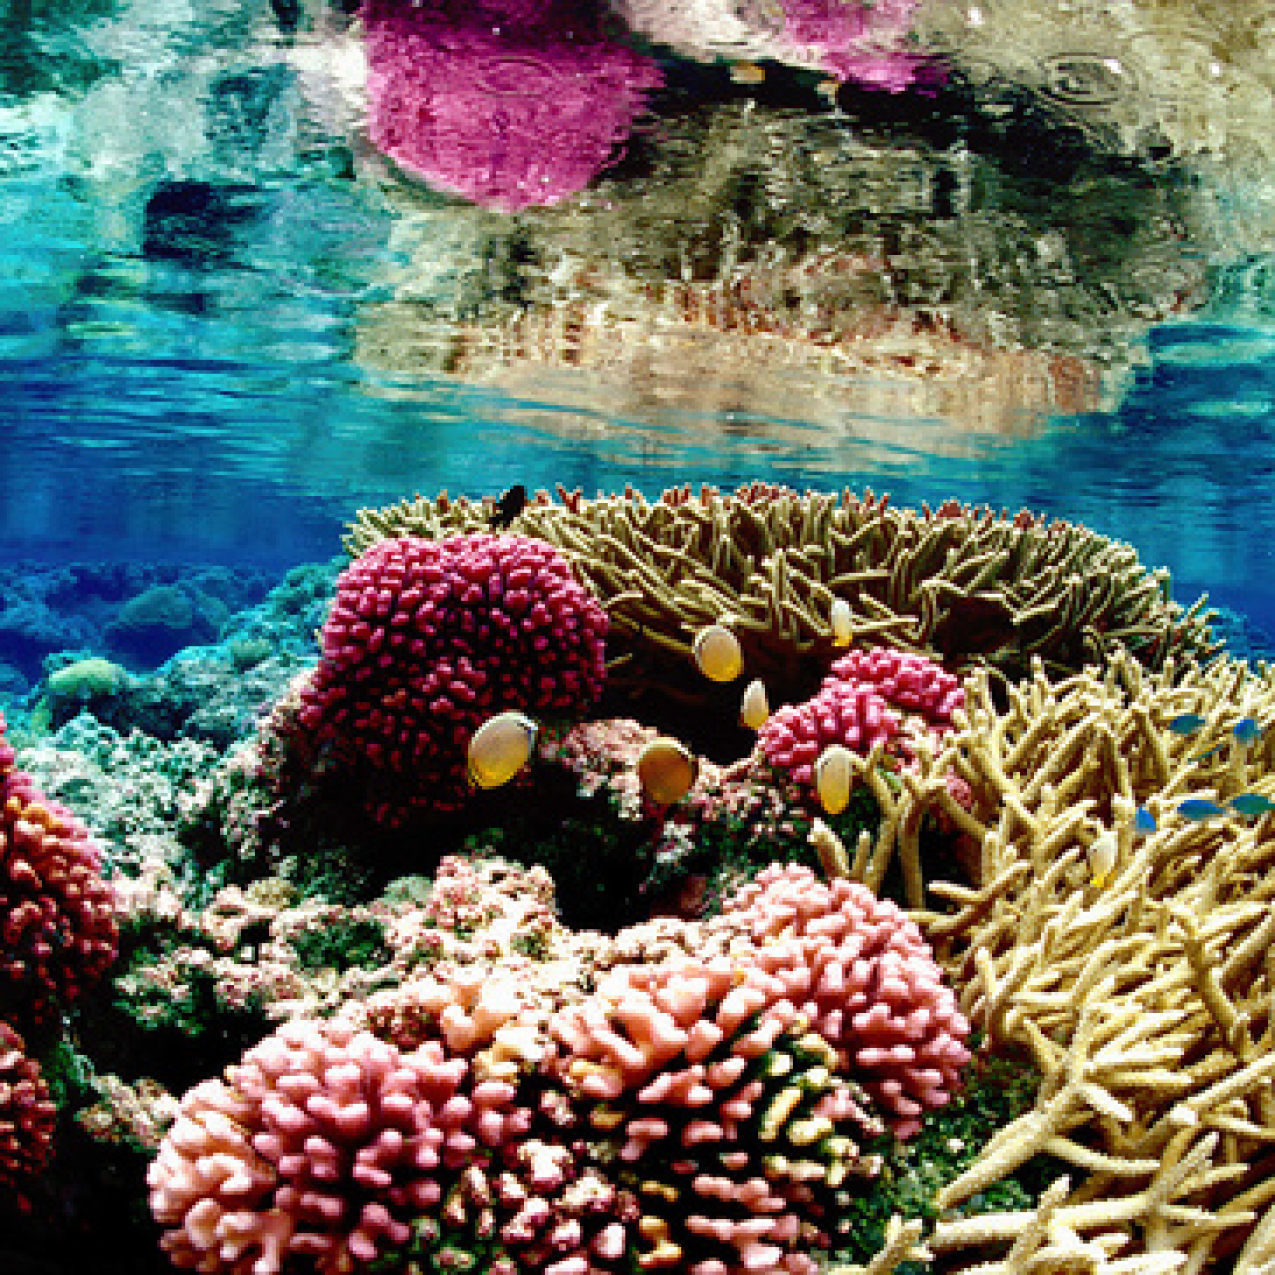 Colorful corals at a coral reef ecosystem at Palmyra Atoll National Wildlife Refuge.